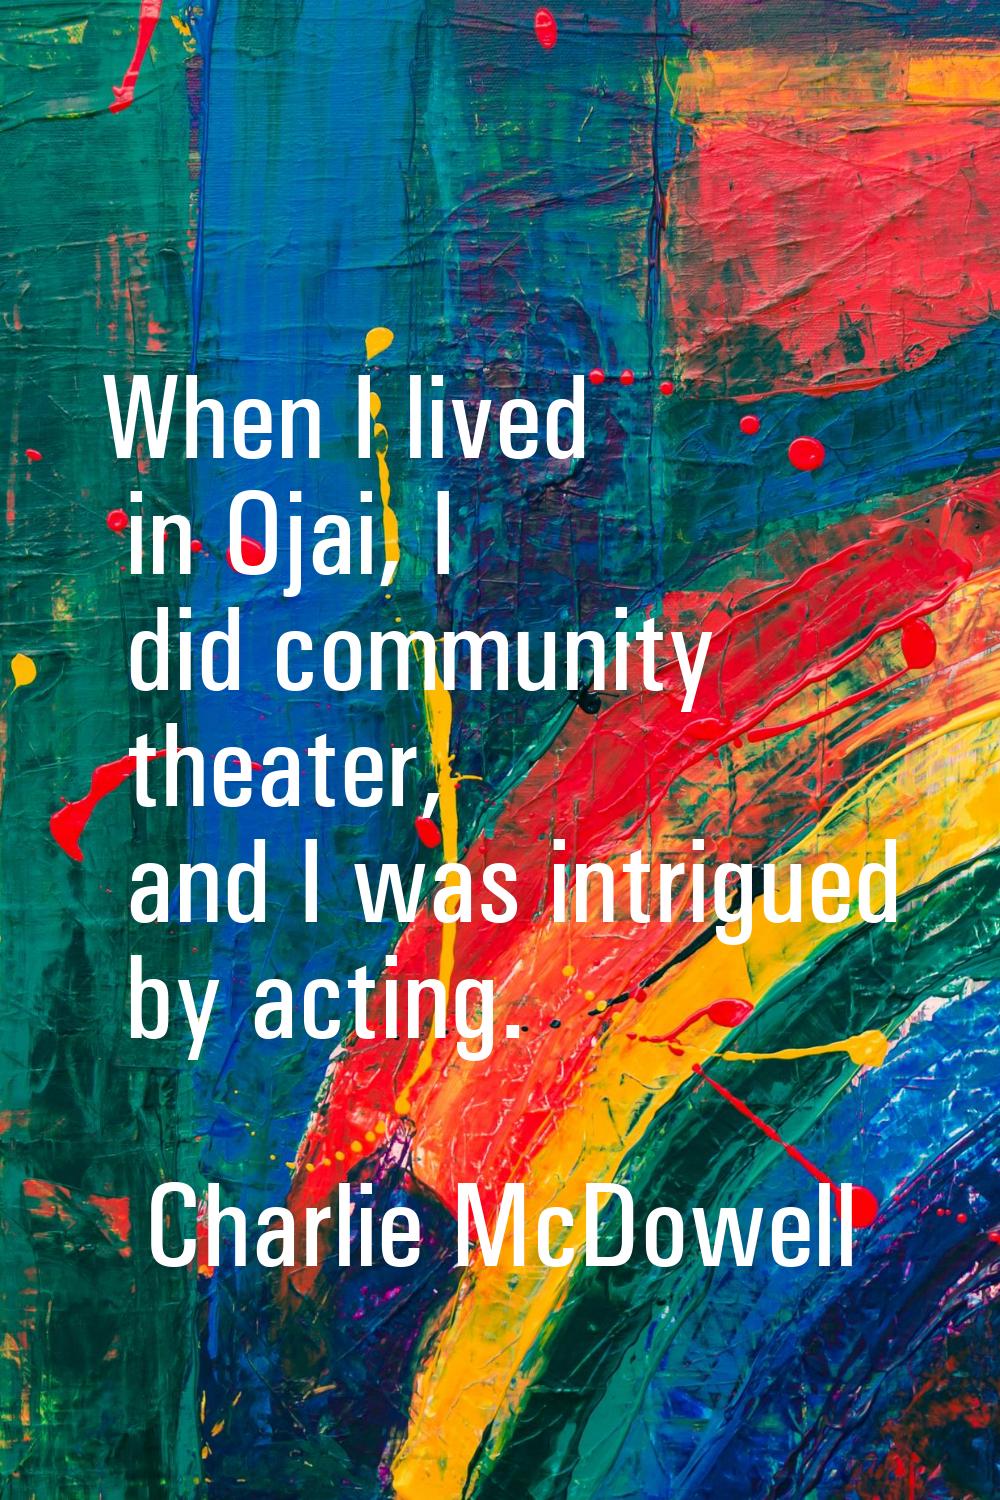 When I lived in Ojai, I did community theater, and I was intrigued by acting.